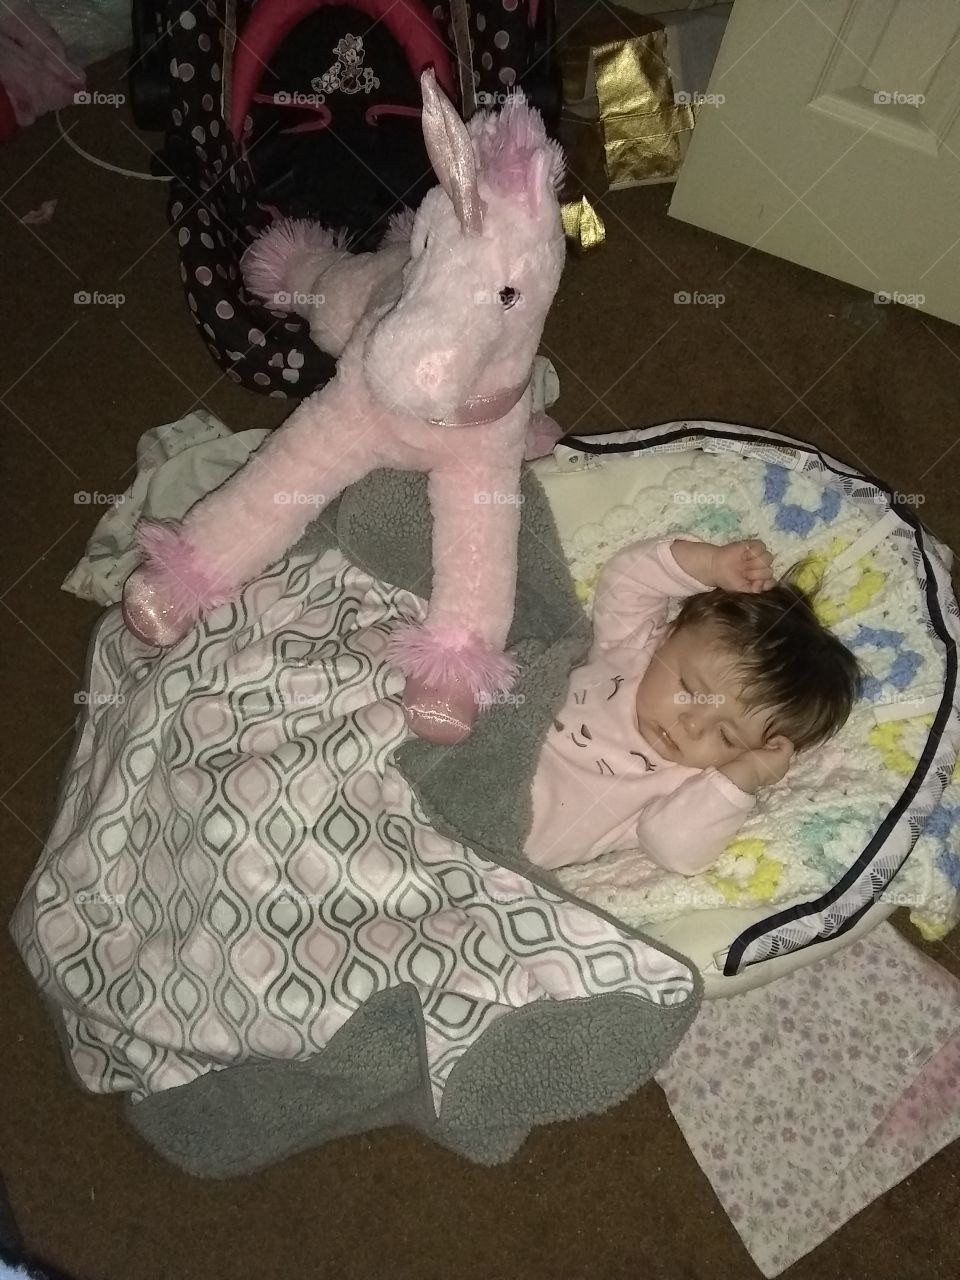 my Easter unicorn after a big Easter egg hunt ..... exhausted and sleeping shhhh